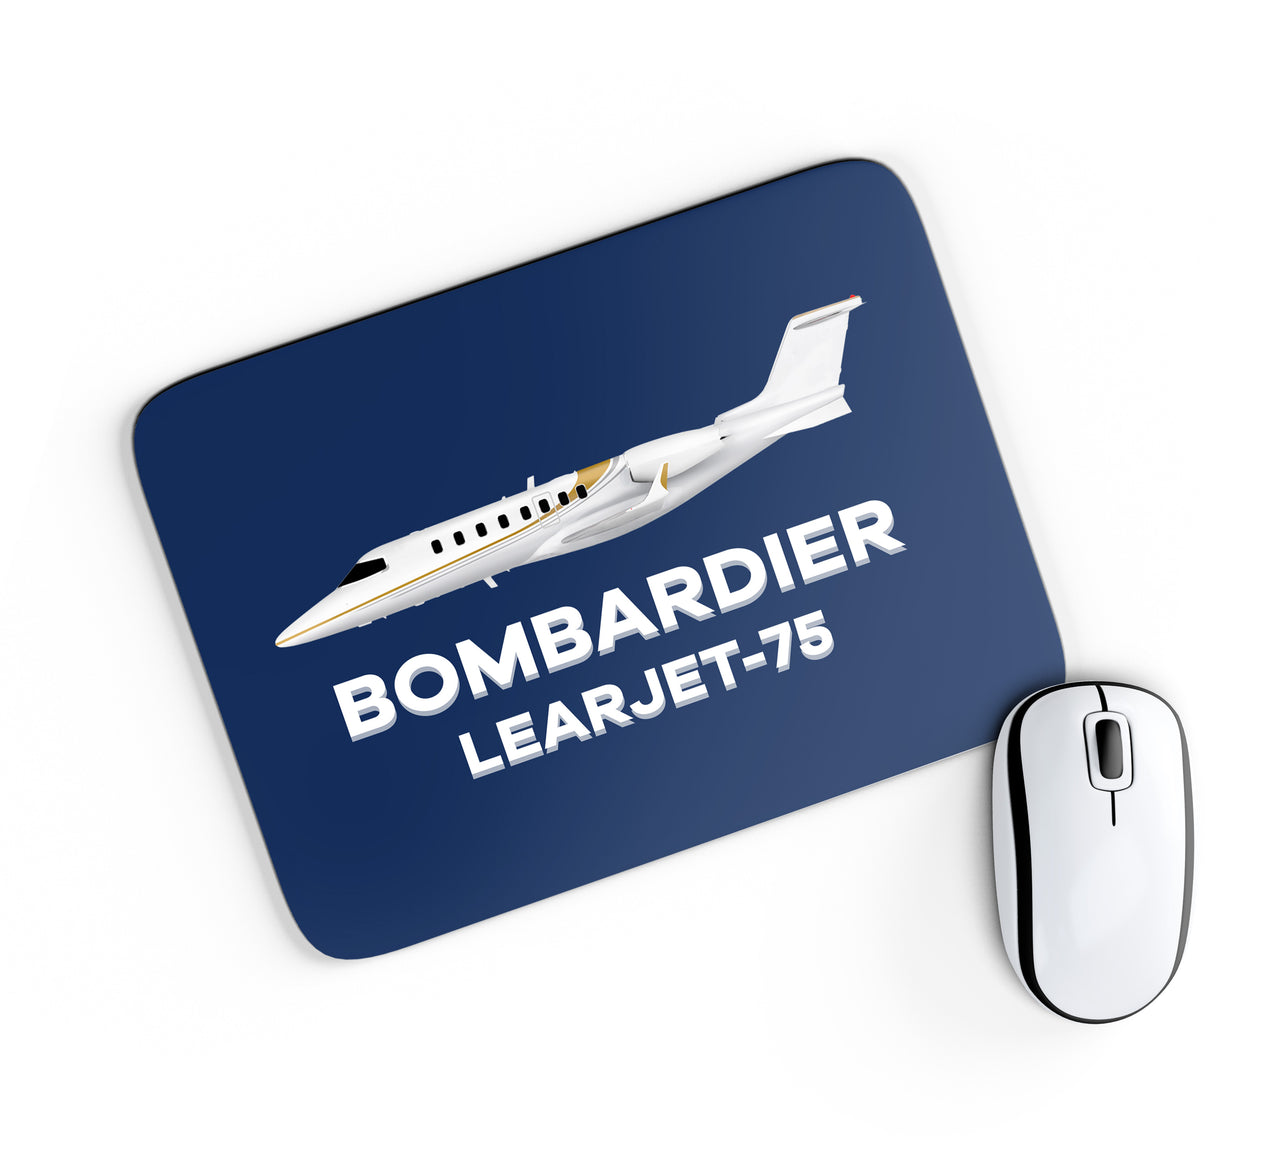 The Bombardier Learjet 75 Designed Mouse Pads